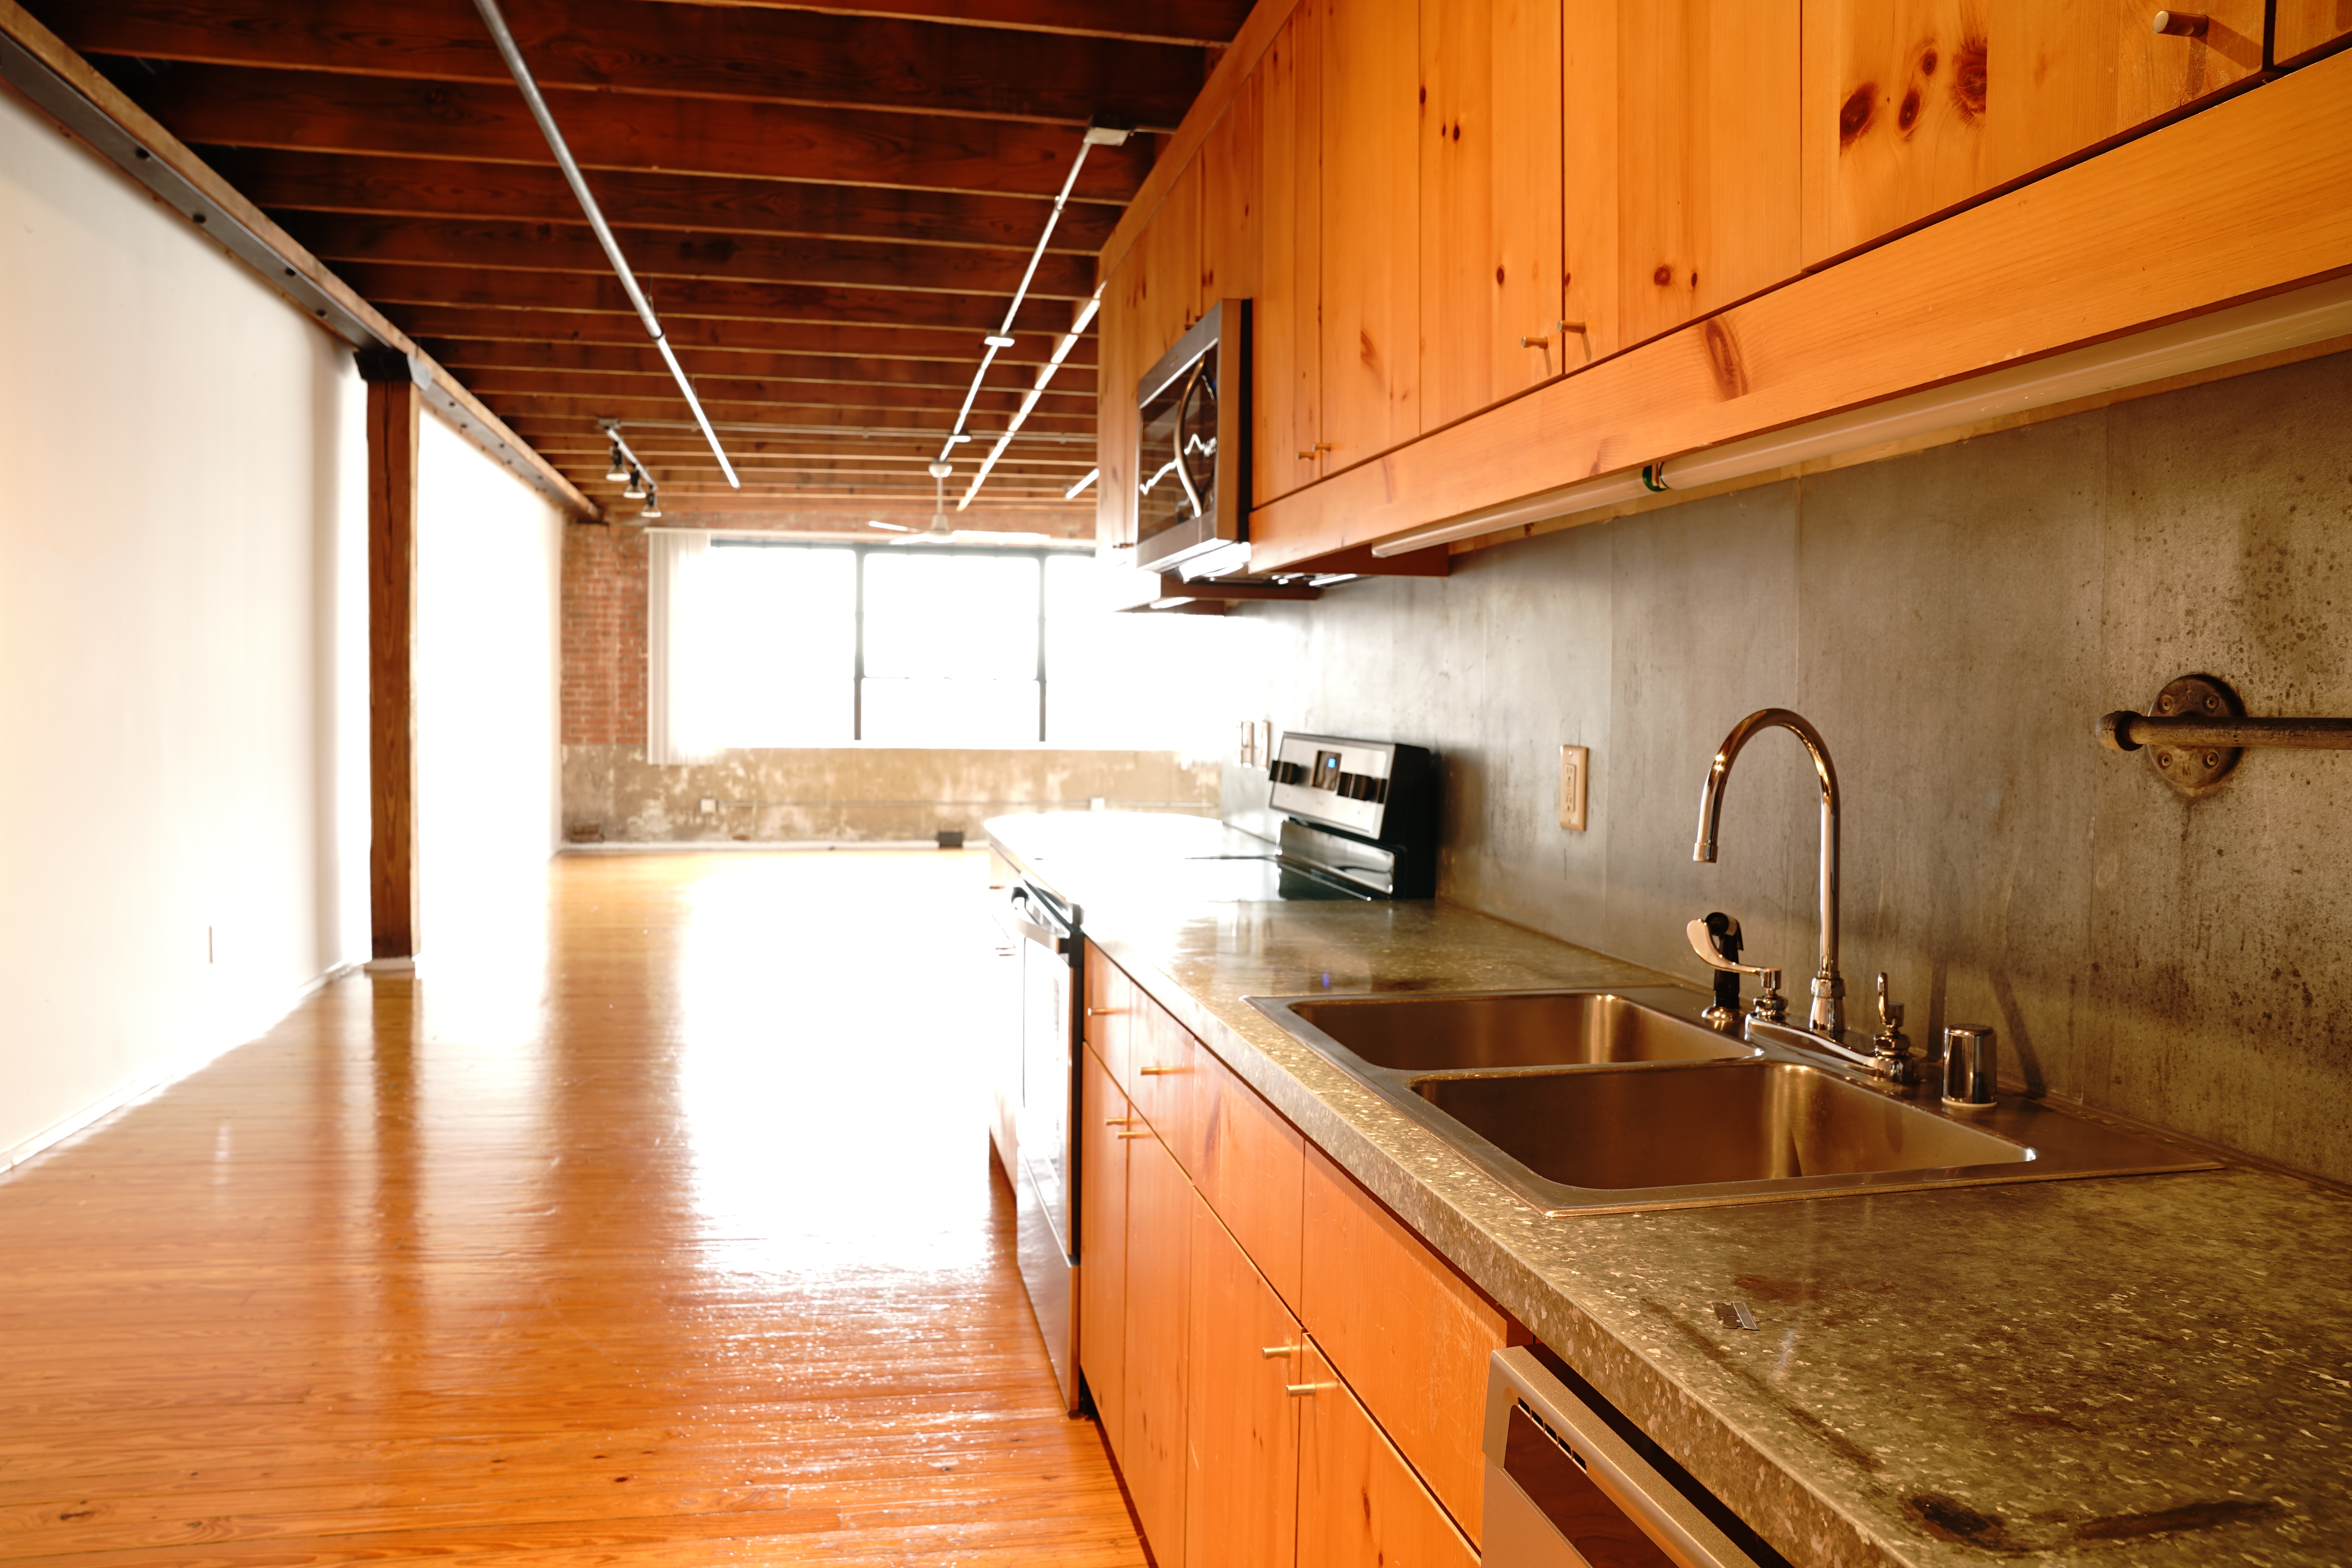  - Industrial Residential/Commercial Lofts #010 - Galley Kitchen